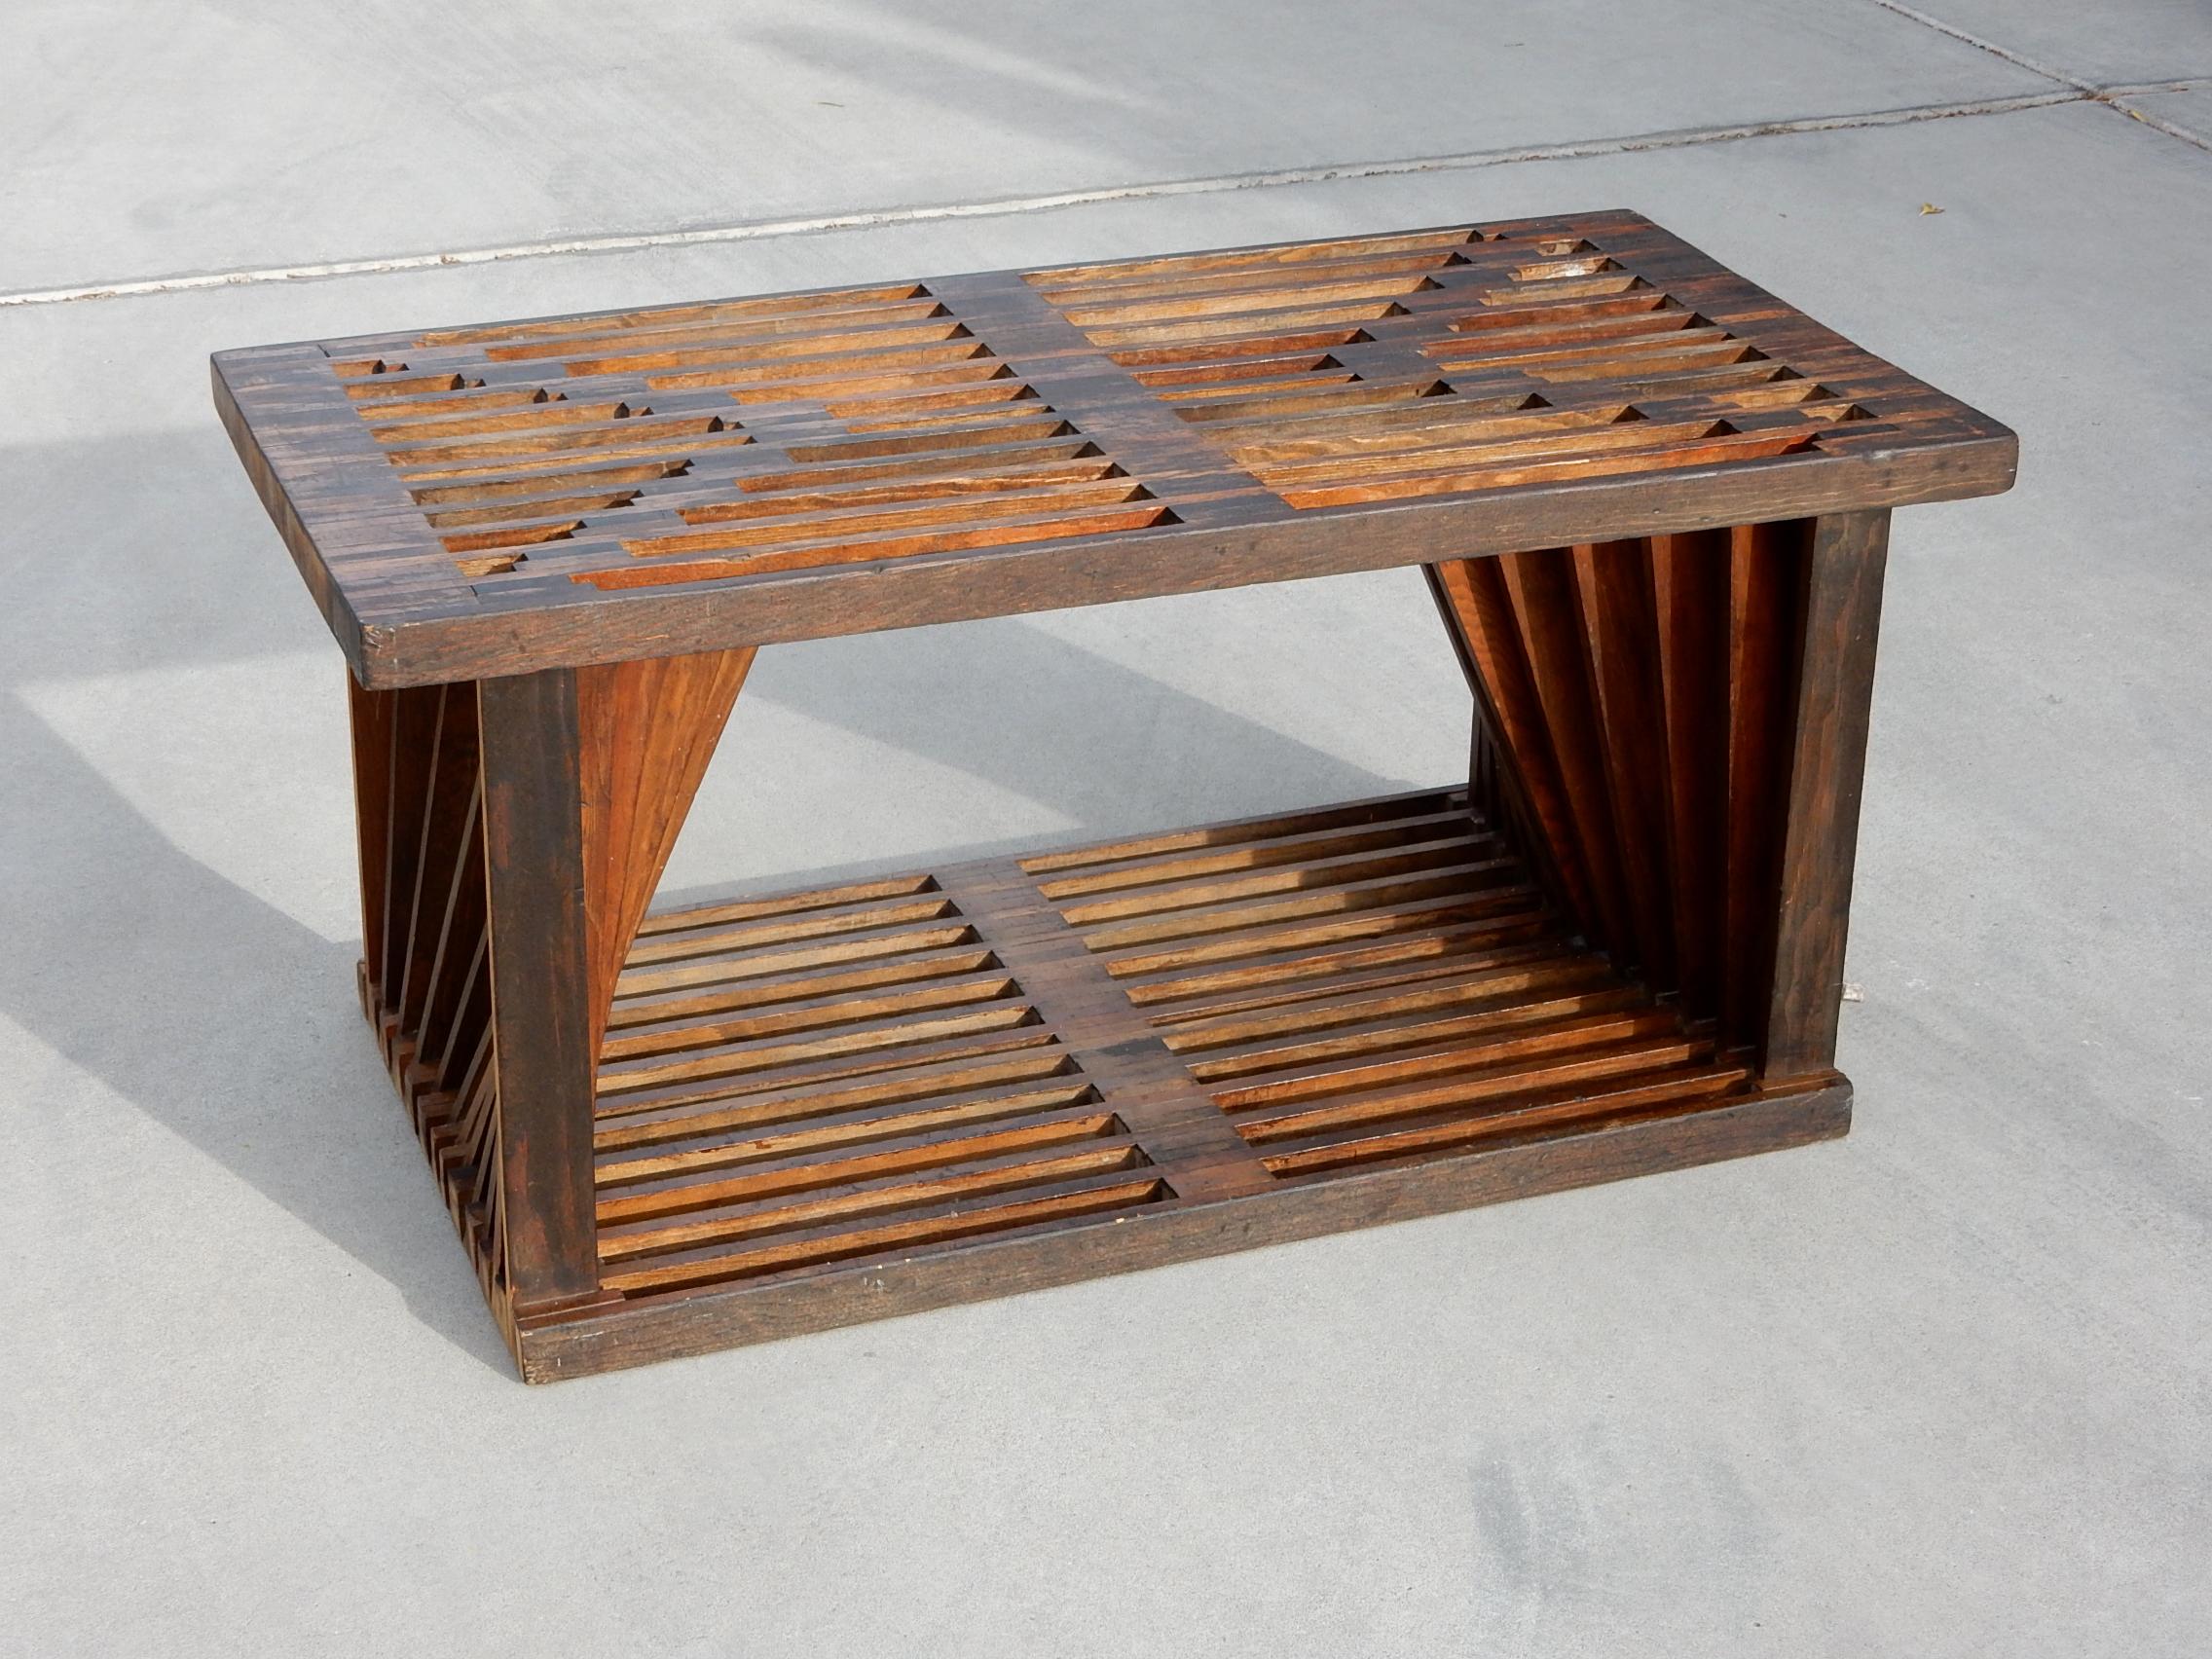 Midcentury Architectural Slat Coffee Table or Bench 2